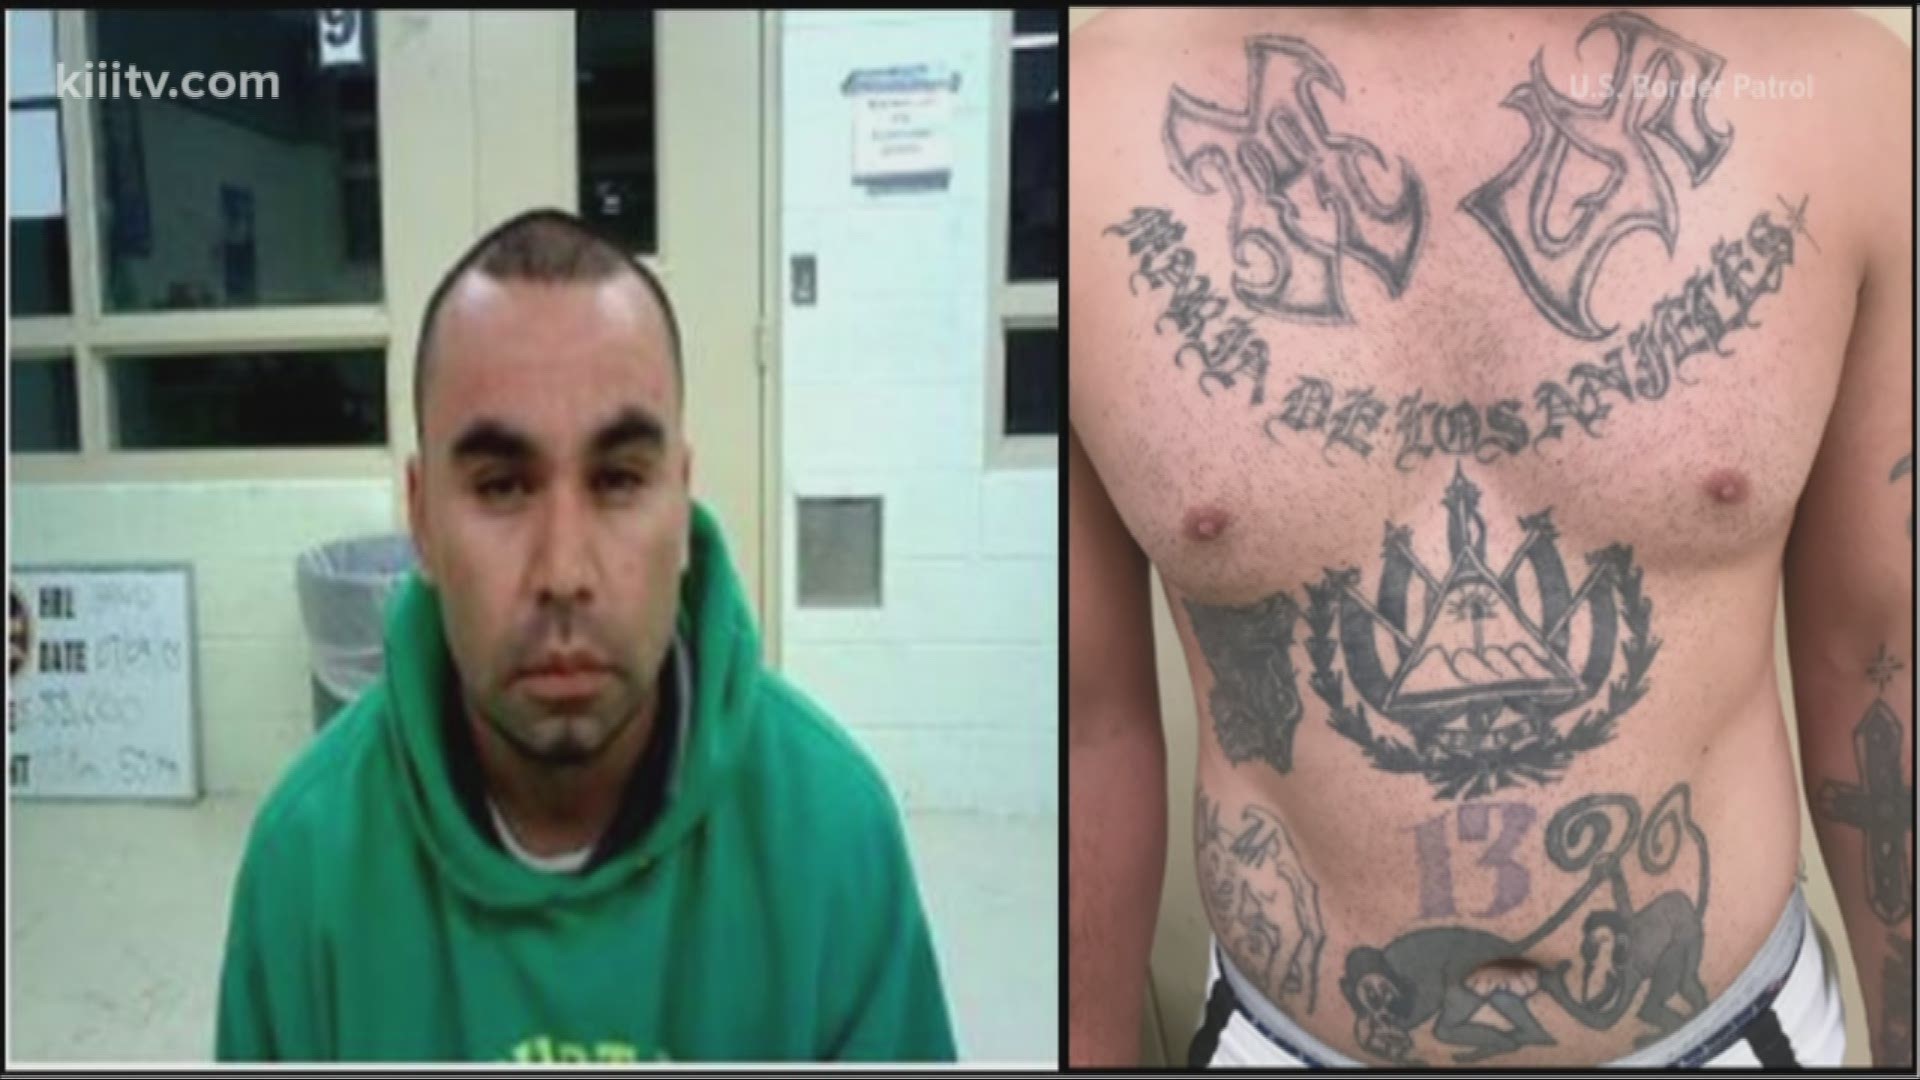 The U.S. Border Patrol arrested a member of the MS-13 gang on the Fourth of July at the Sarita checkpoint just south of Kingsville, Texas.